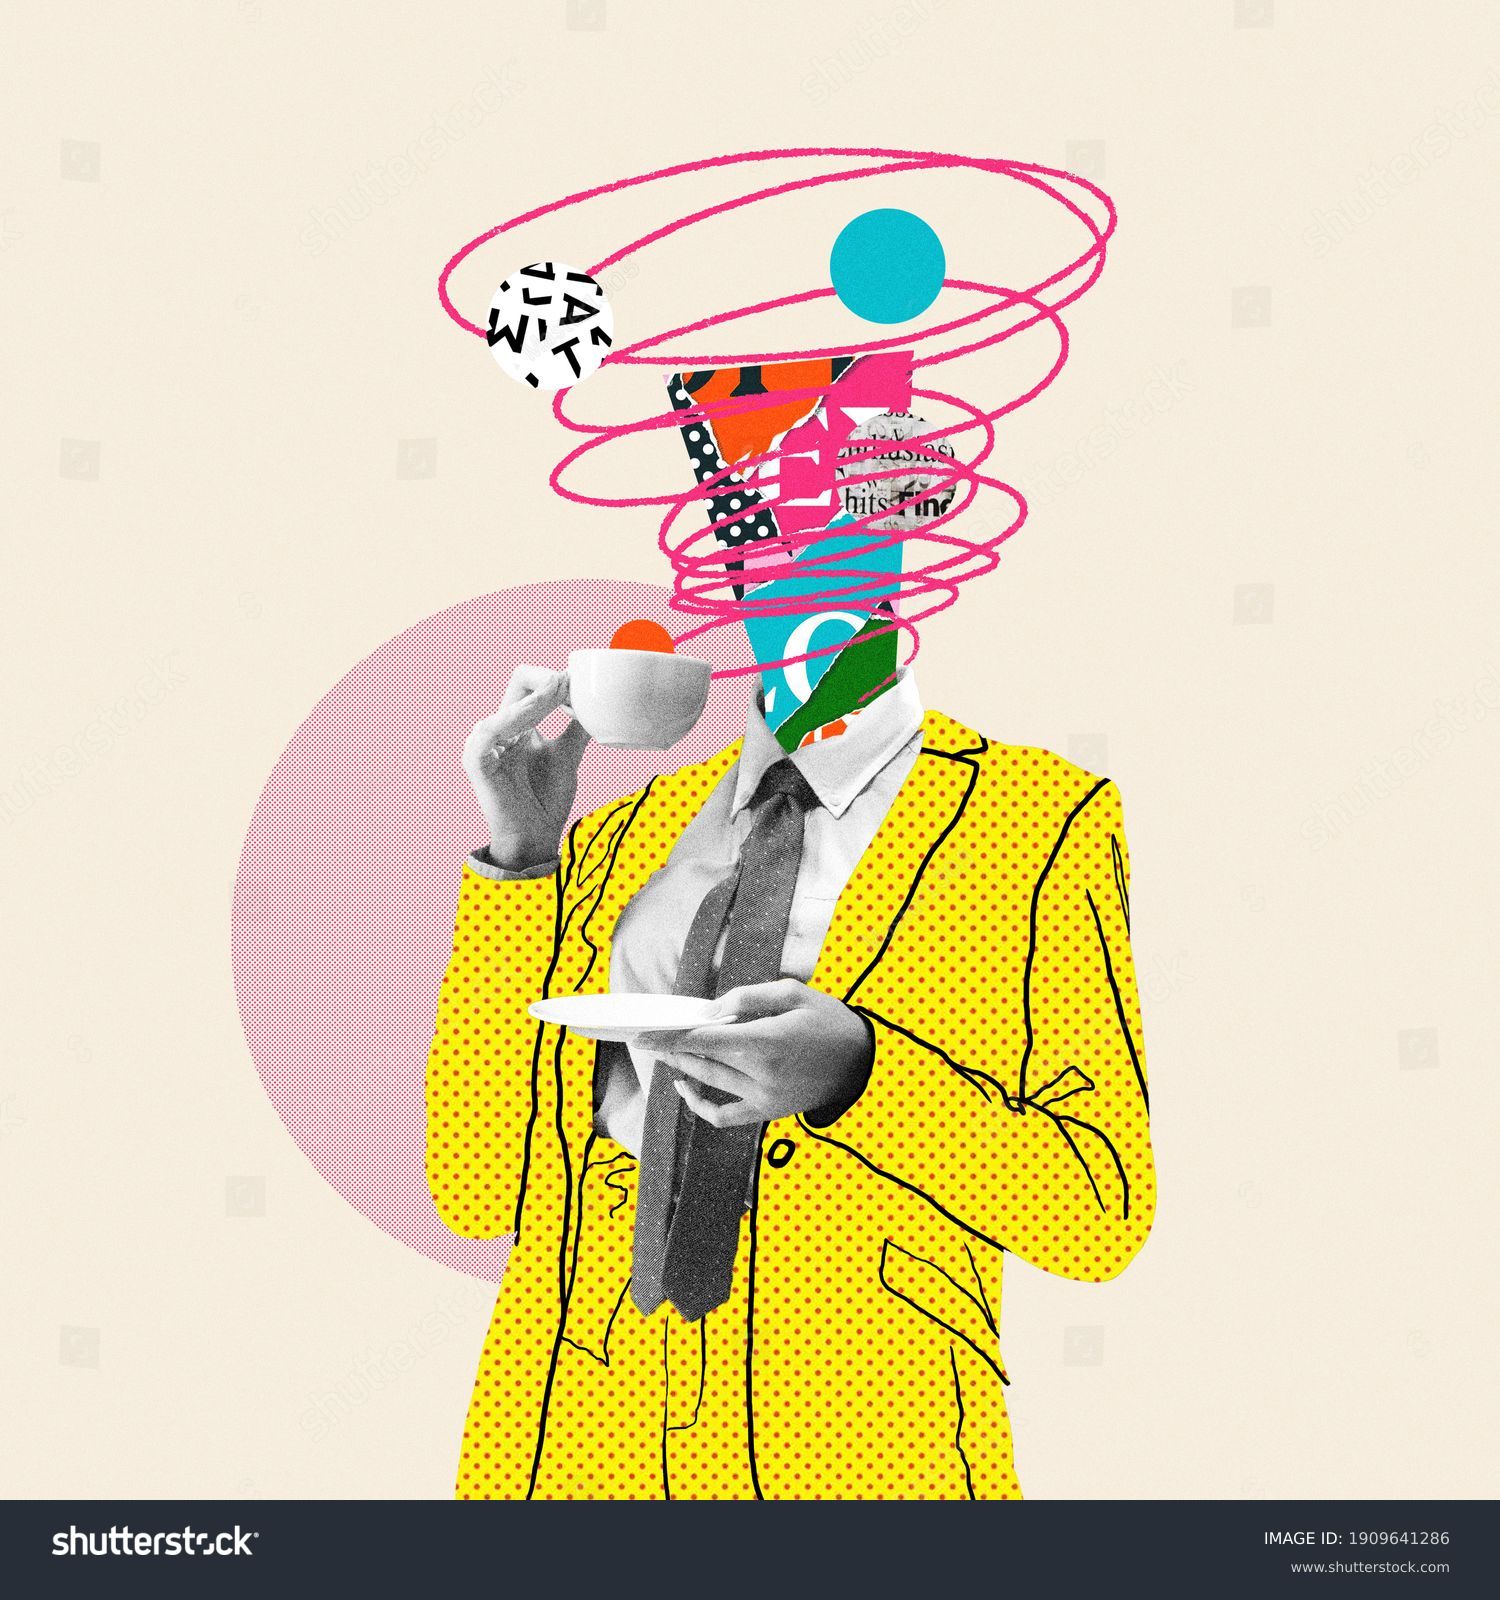 Morning coffee makes things better. Comics styled yellow suit. Modern design, contemporary art collage. Inspiration, idea, trendy urban magazine style. Negative space to insert your text or ad. #1909641286